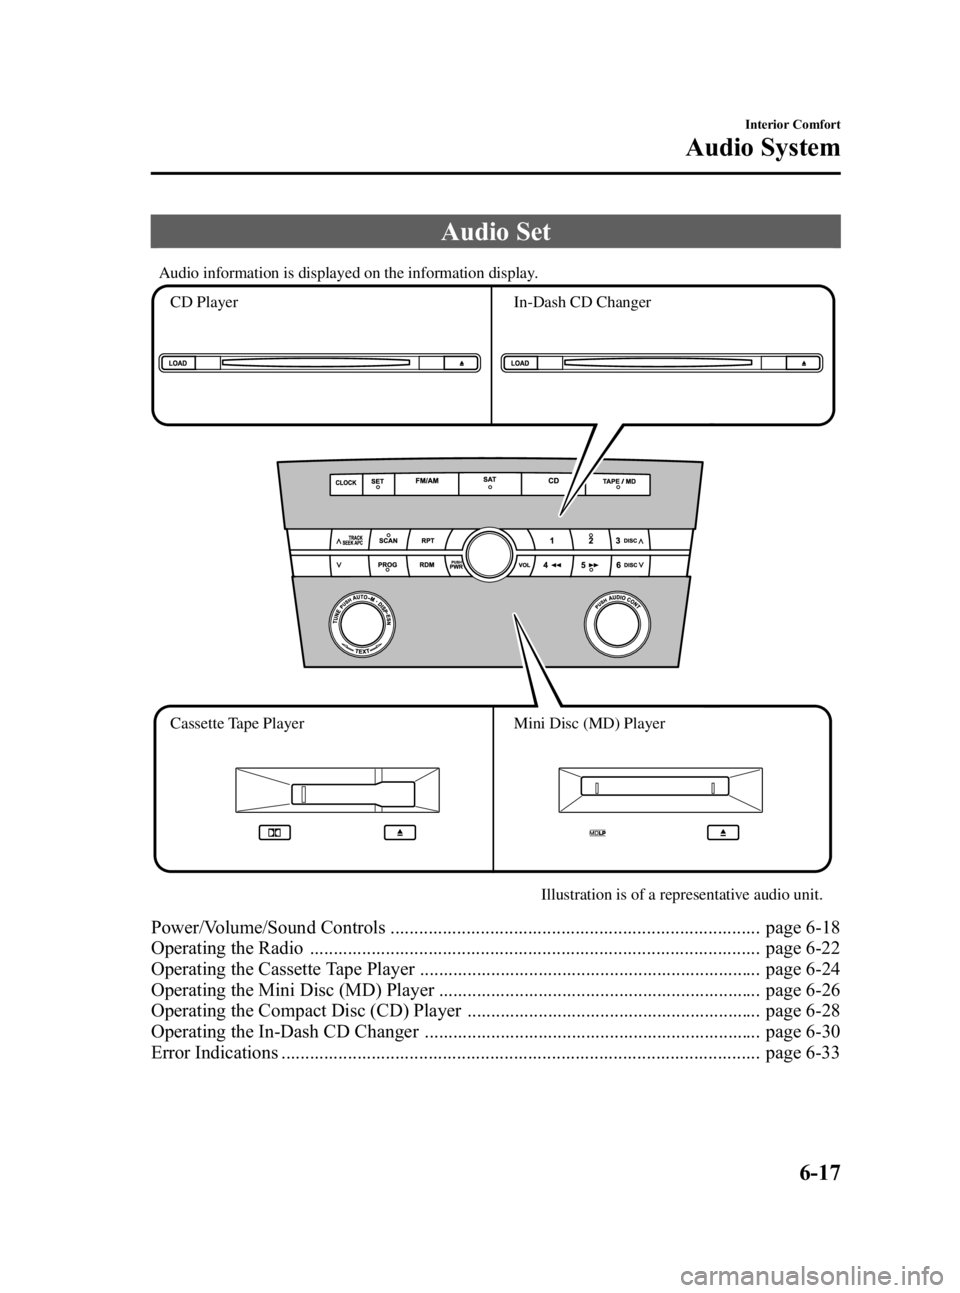 MAZDA MODEL 3 5-DOOR 2005  Owners Manual Black plate (187,1)
Audio Set
CD Player  In-Dash CD Changer
Cassette Tape Player Mini Disc (MD) Player
Illustration is of a representative audio unit.
Audio information is displayed on the information